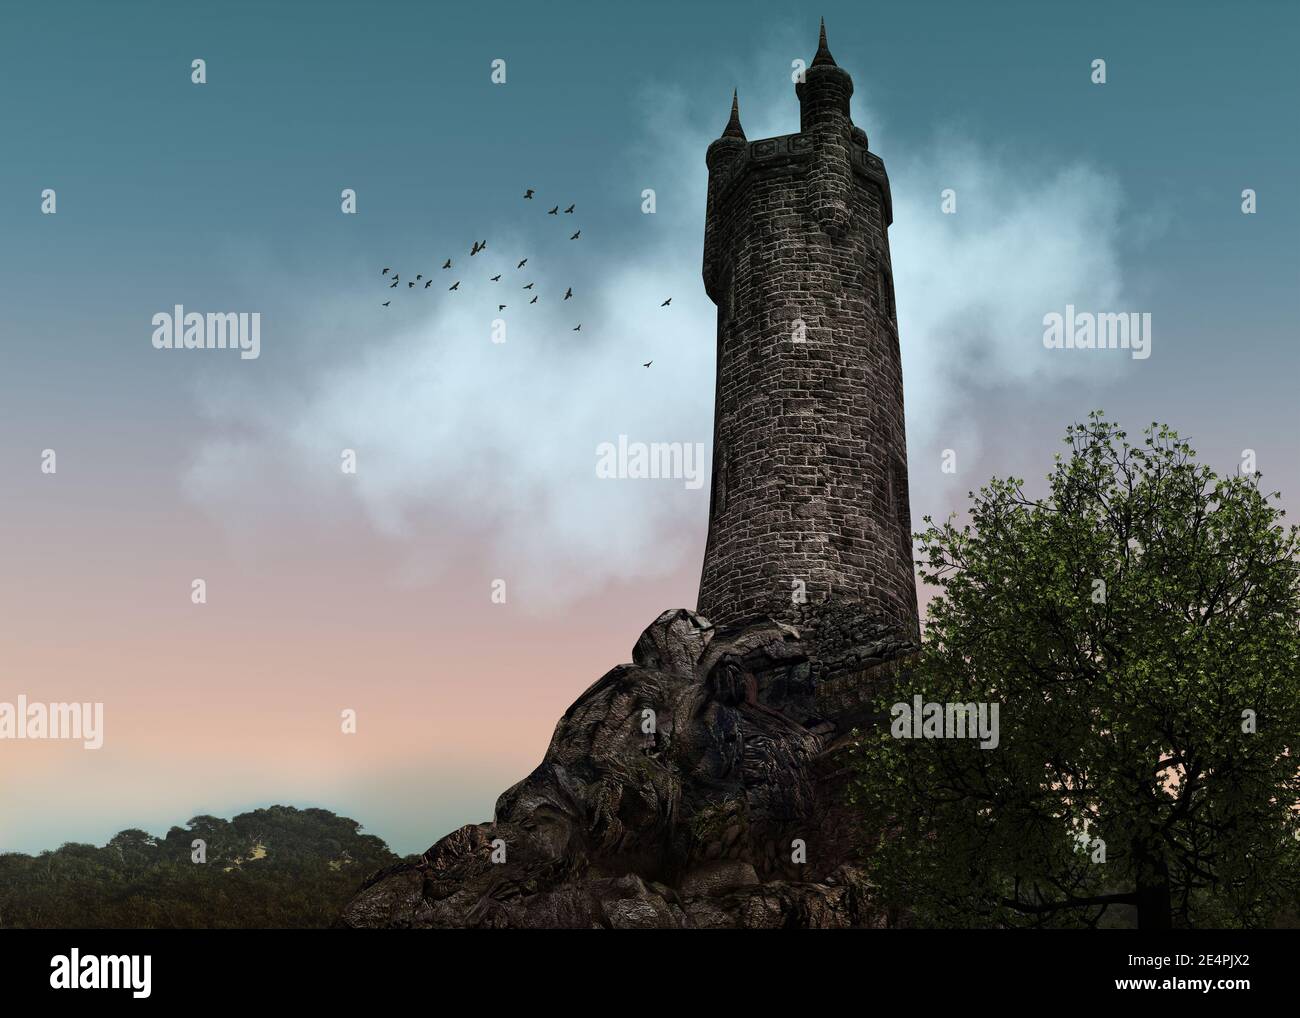 3d computer graphics of a fairy tale tower and landscape Stock Photo